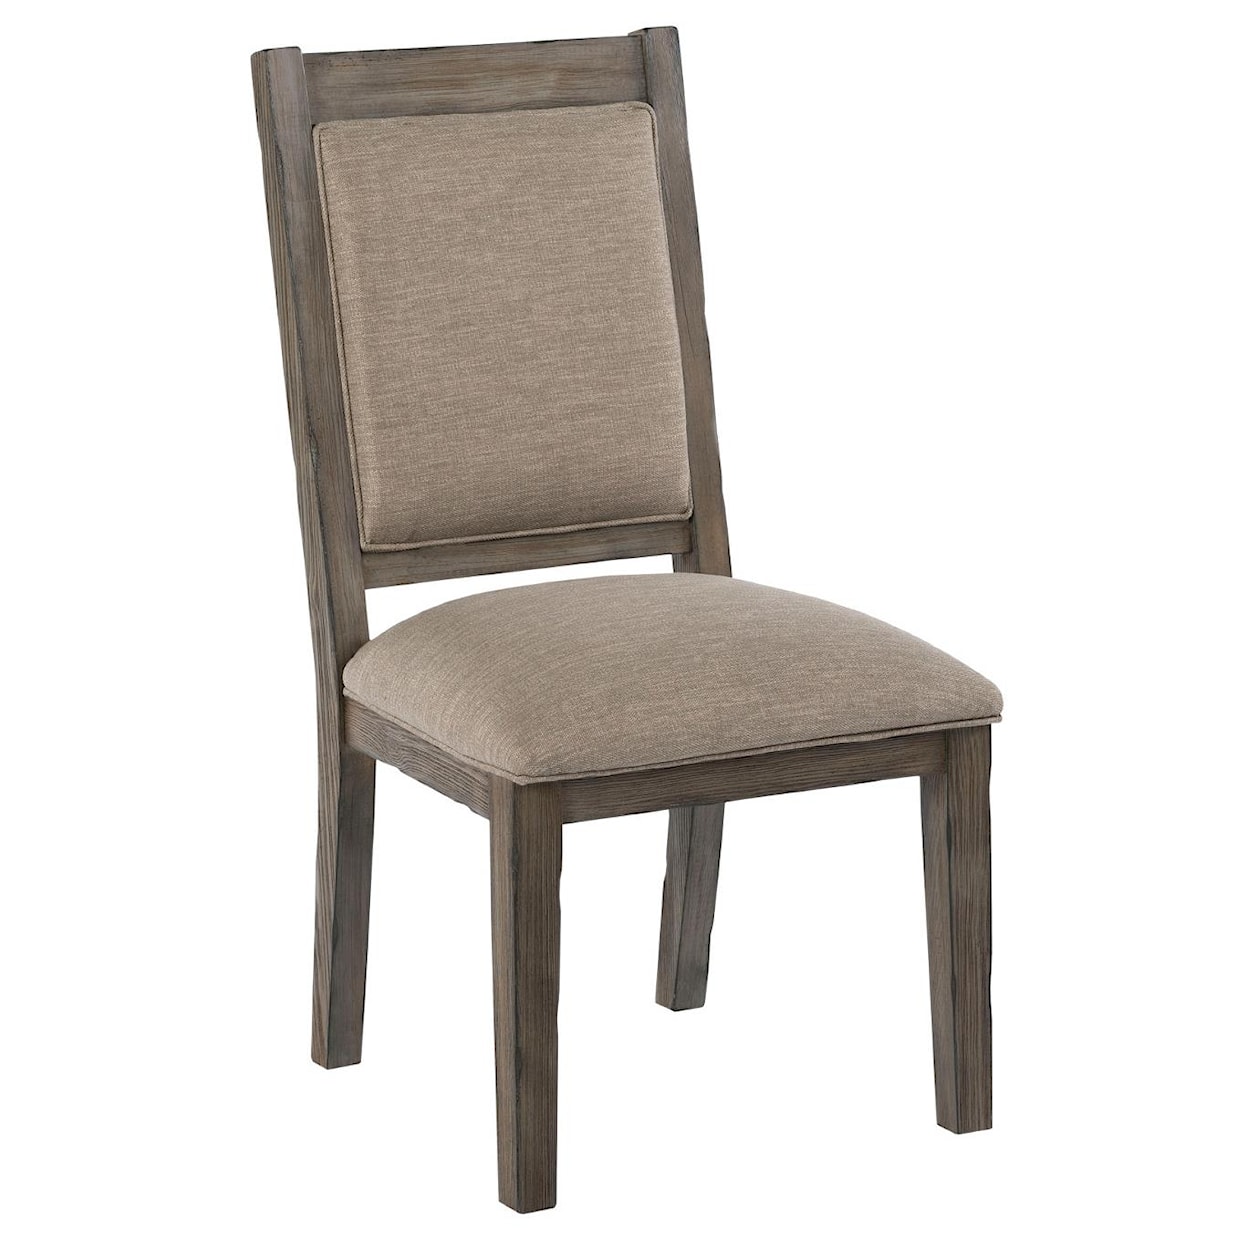 Kincaid Furniture Foundry Upholstered Side Chair